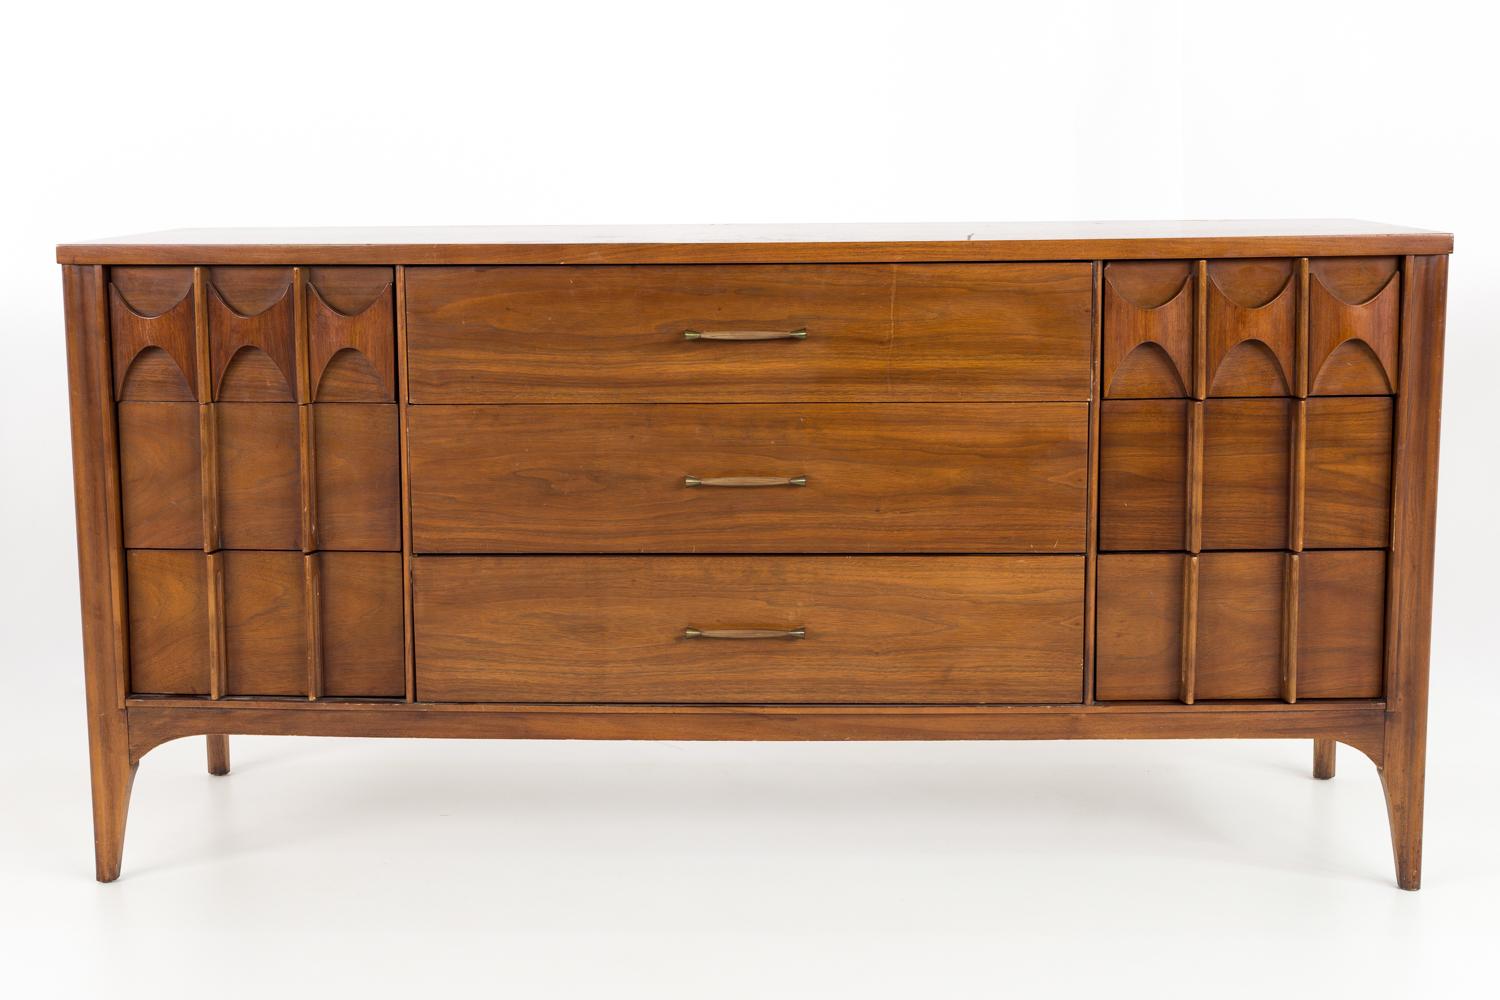 Kent Coffey perspecta walnut and rosewood 9 drawer lowboy dresser

This lowboy measures: 64 wide x 19 deep x 31 inches high

All pieces of furniture can be had in what we call restored vintage condition. That means the piece is restored upon